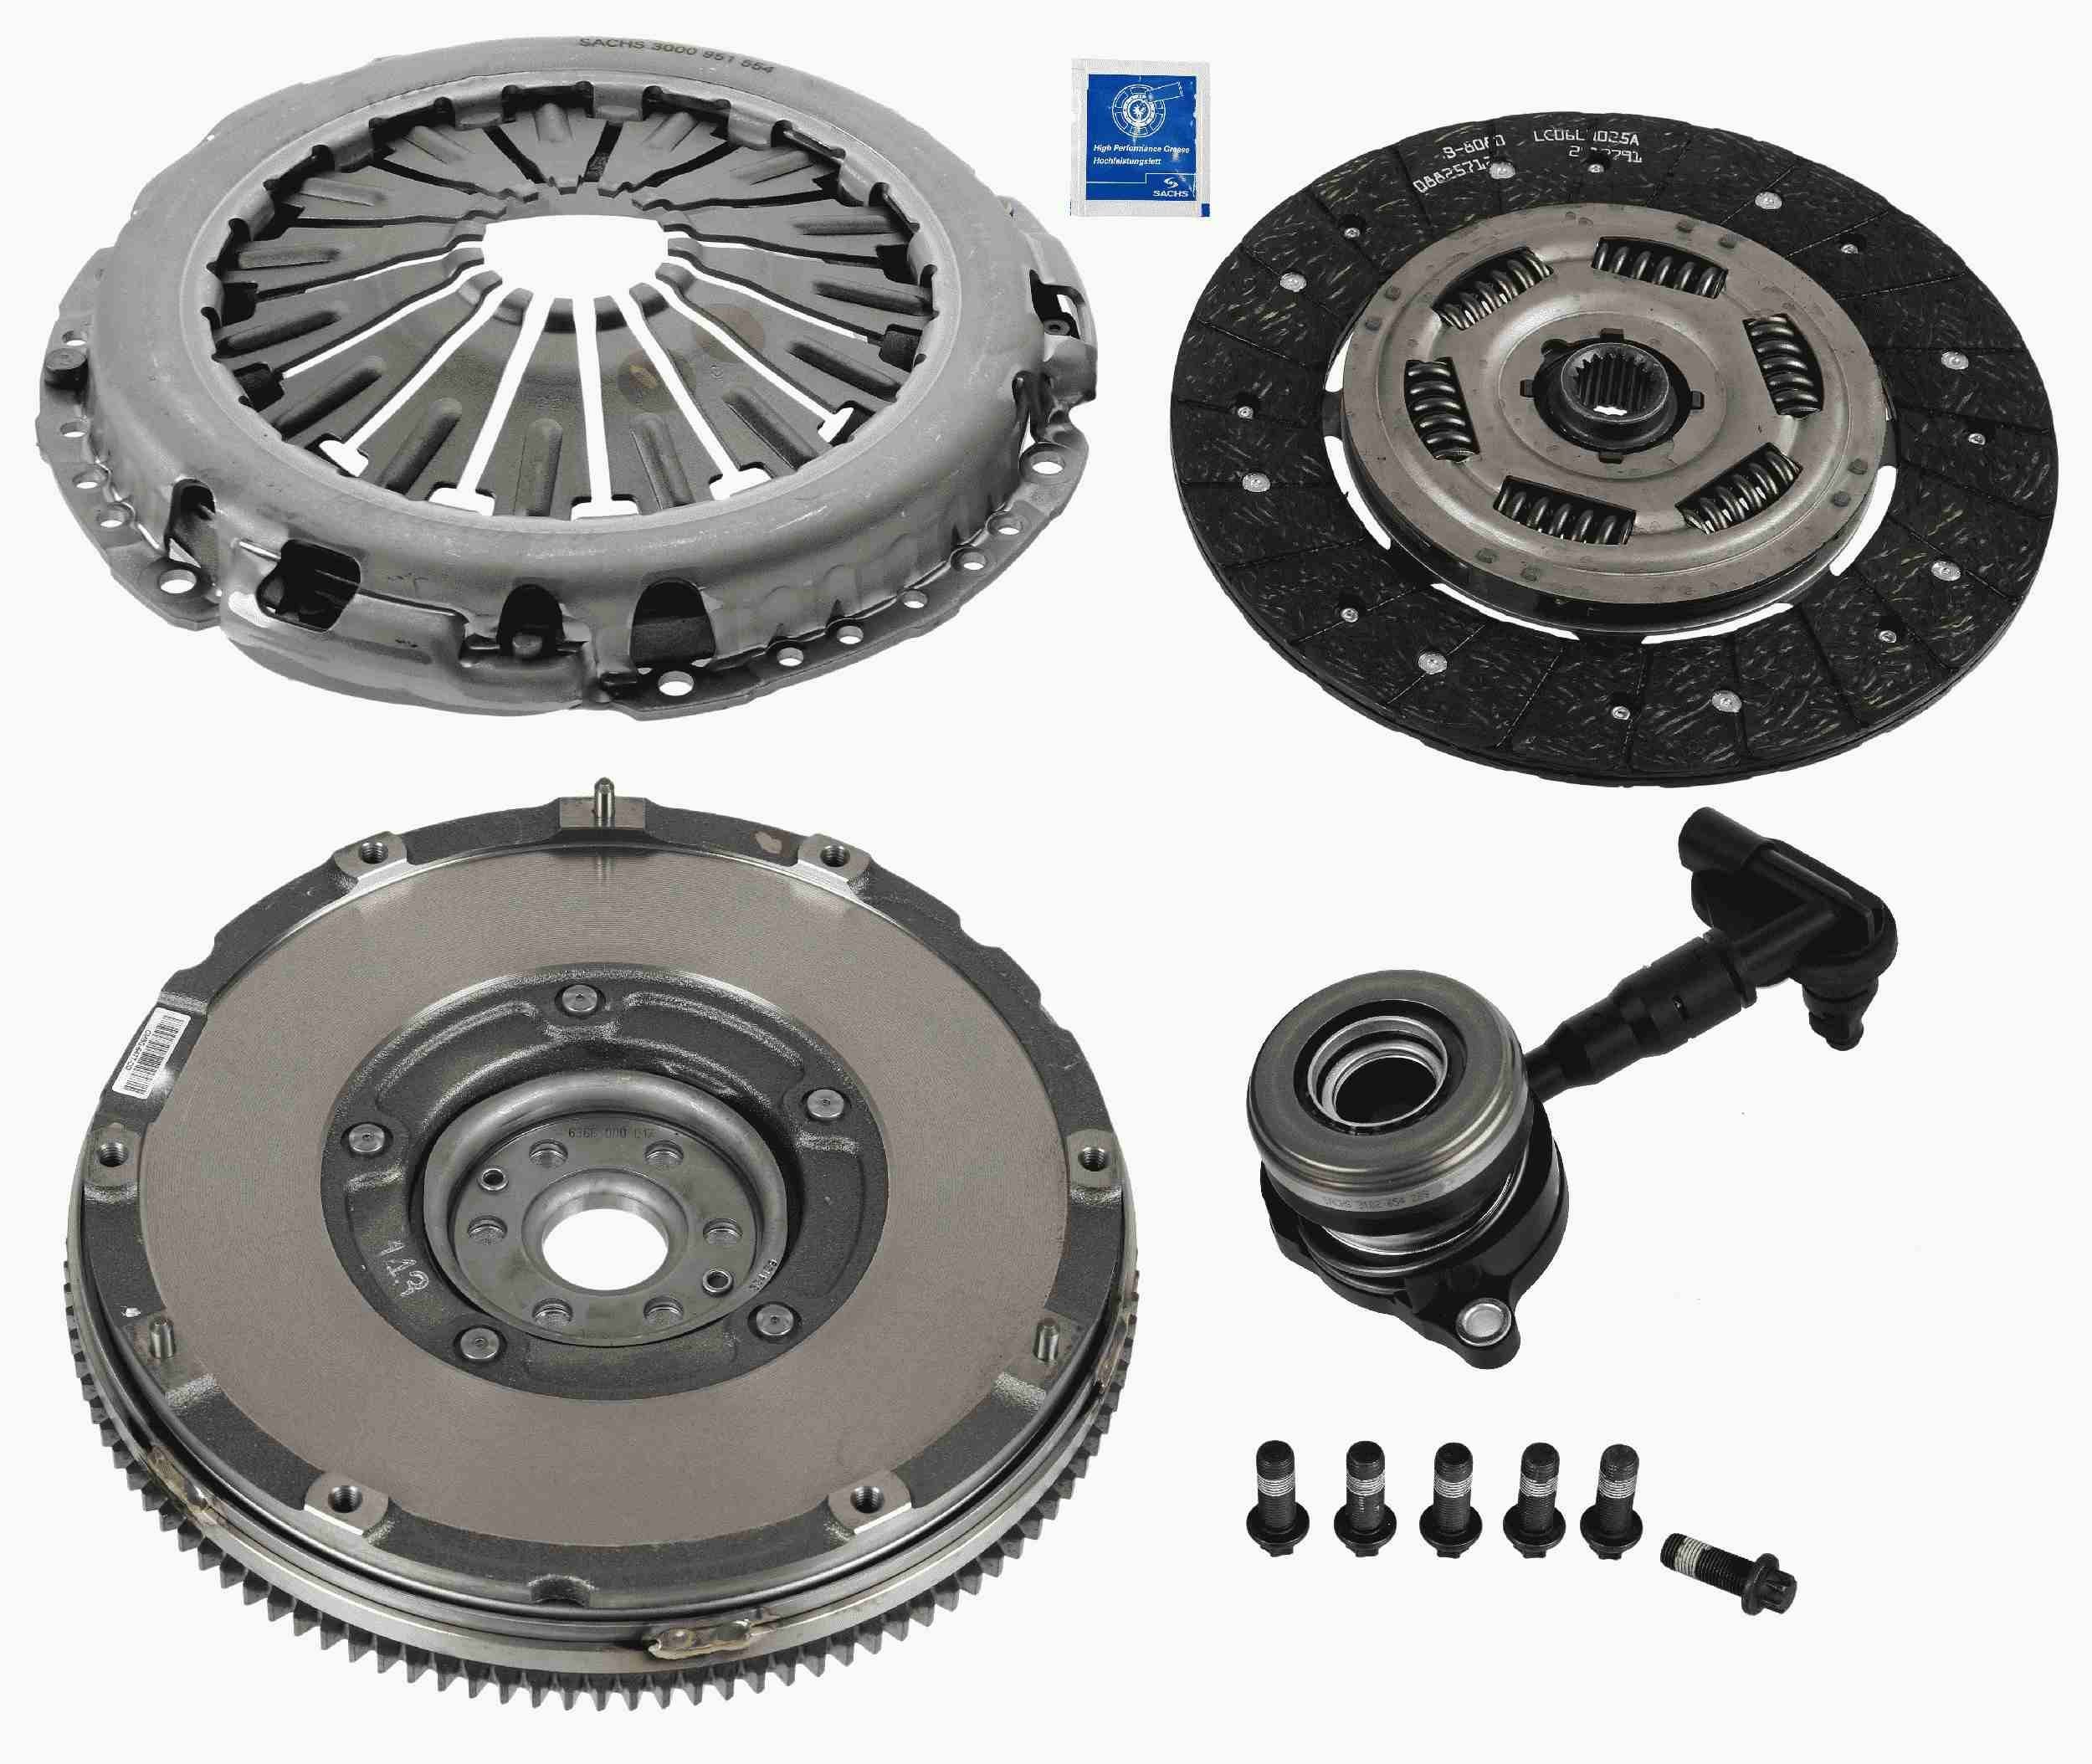 SACHS 2290 601 123 Clutch kit with central slave cylinder, with clutch pressure plate, with dual-mass flywheel, with flywheel screws, with clutch disc, 240mm